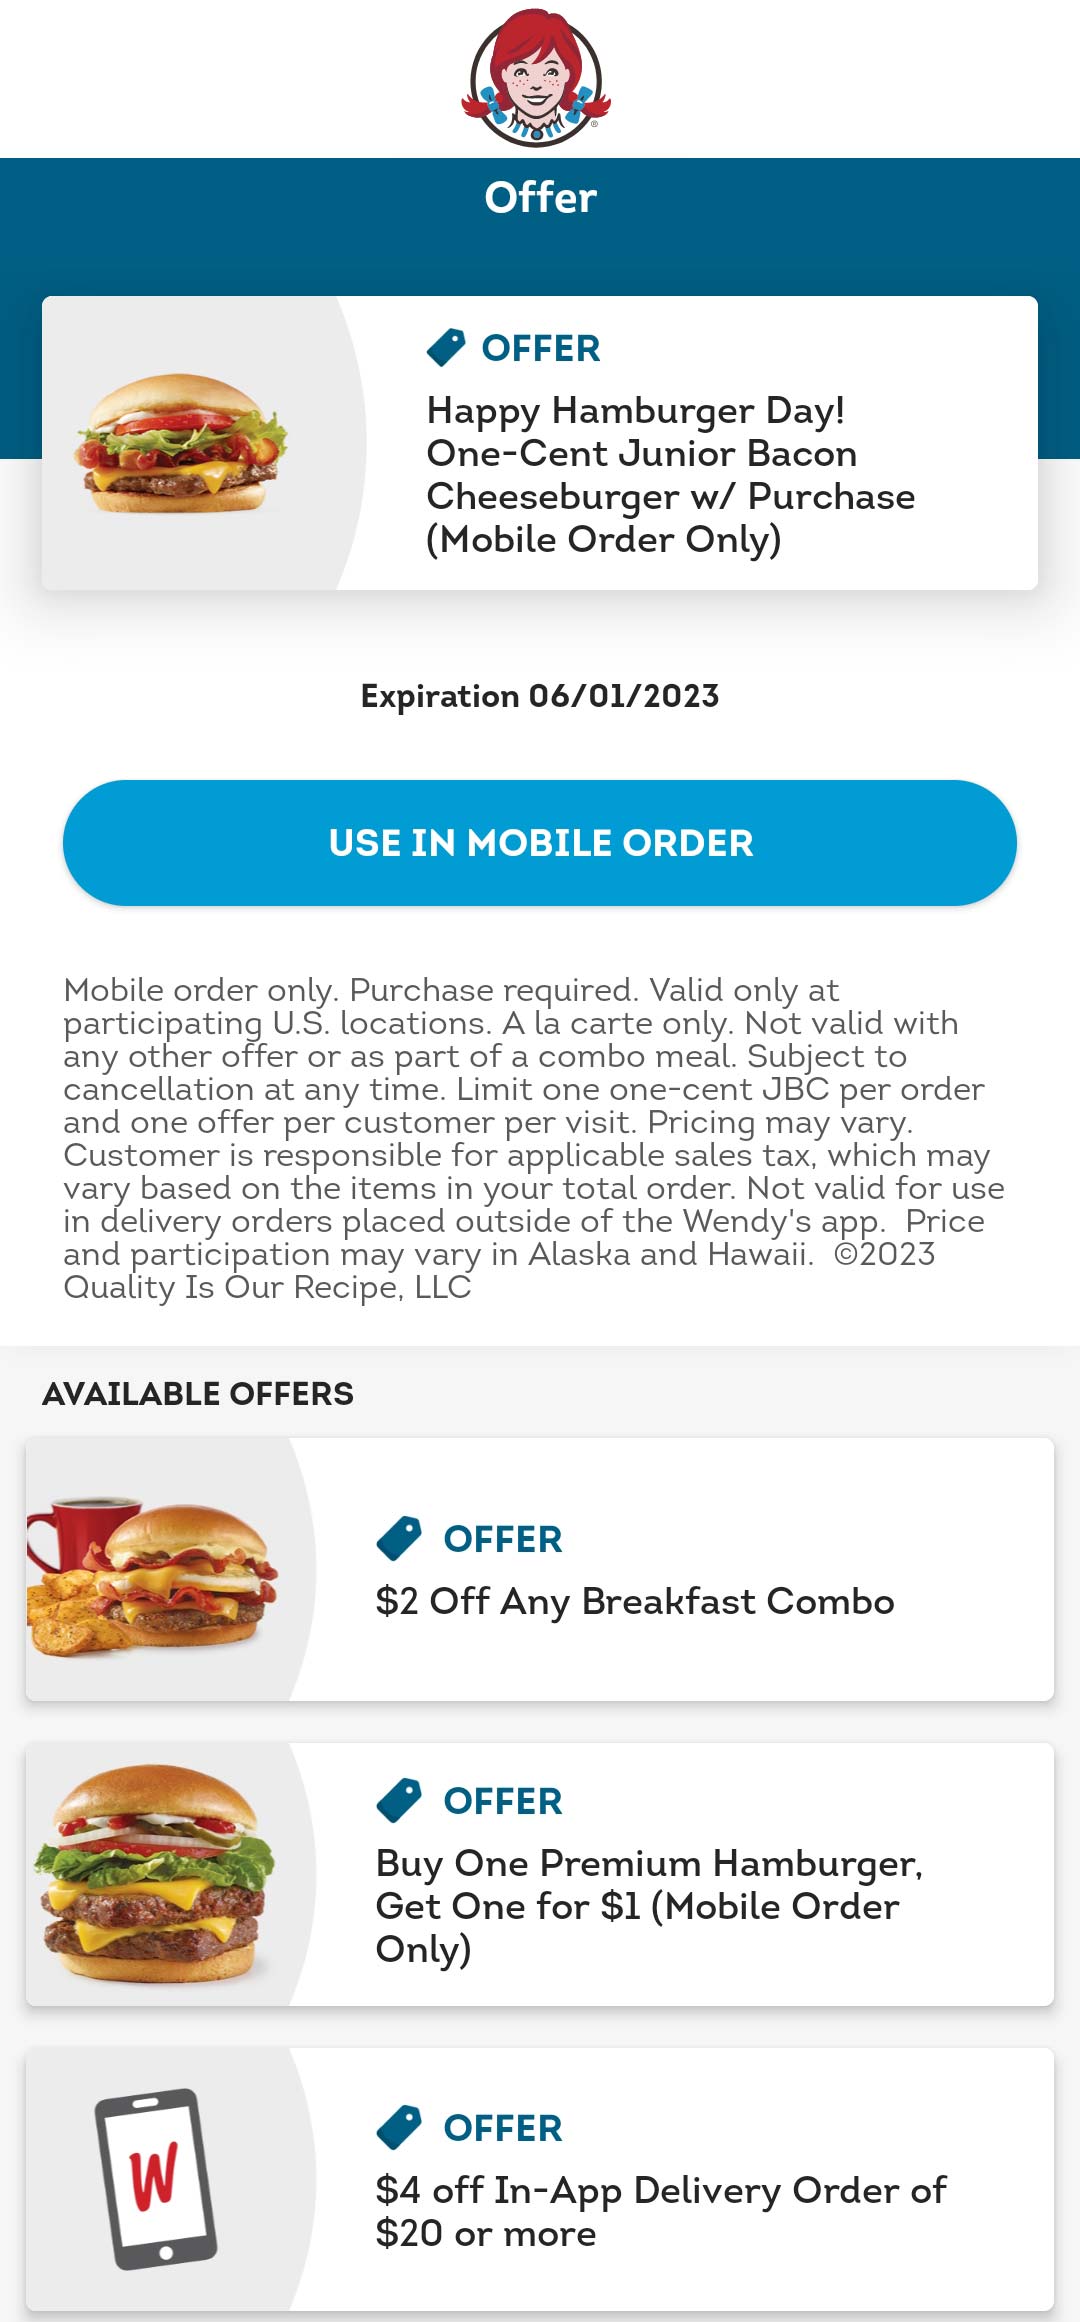 Wendys restaurants Coupon  Jr bacon cheeseburger for a penny via mobile at Wendys #wendys 